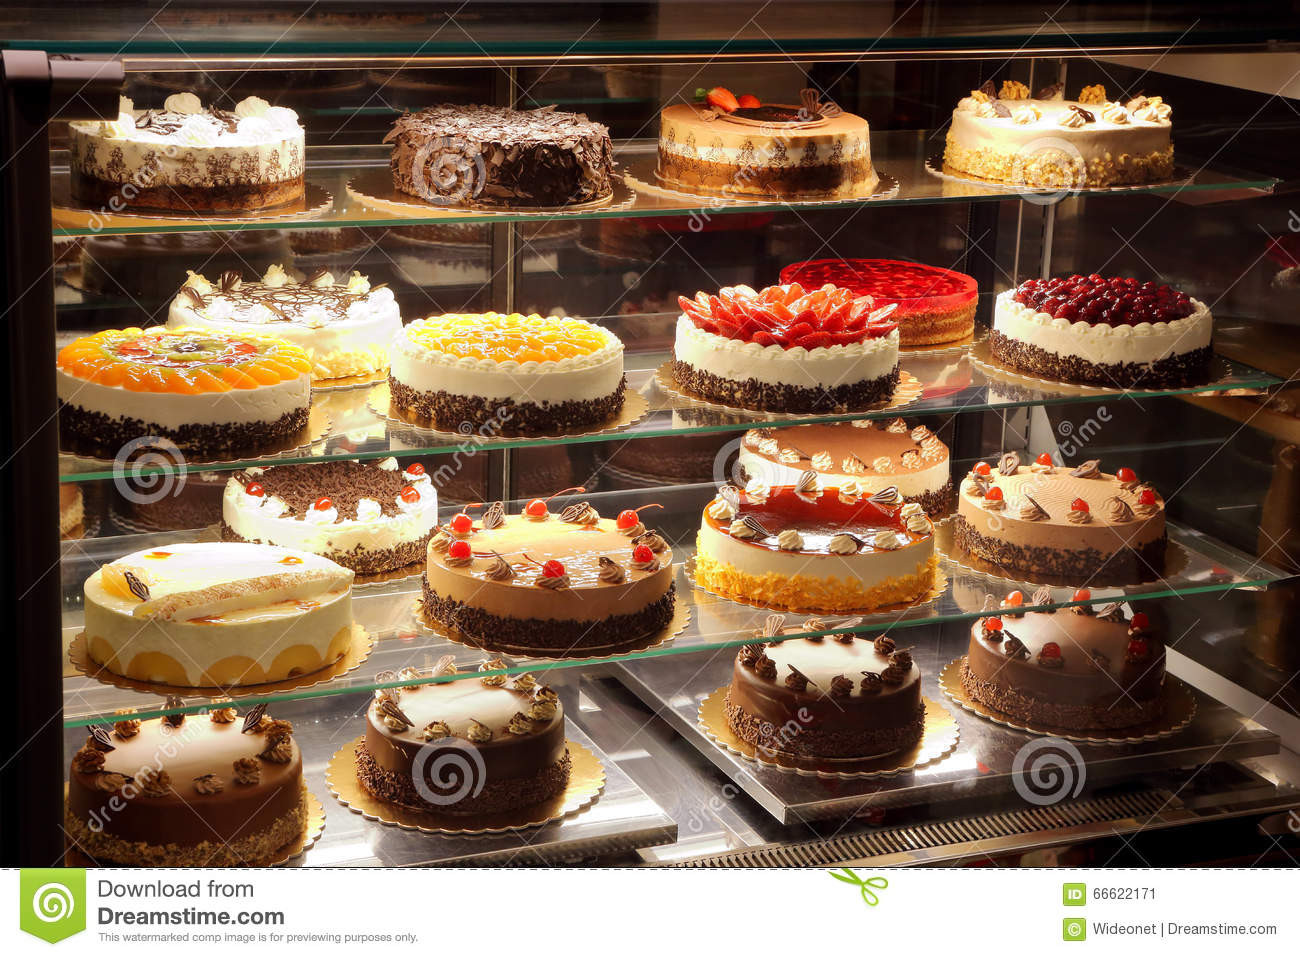 Types Of Christmas Cakes
 Different Types Cakes In Pastry Shop Glass Display